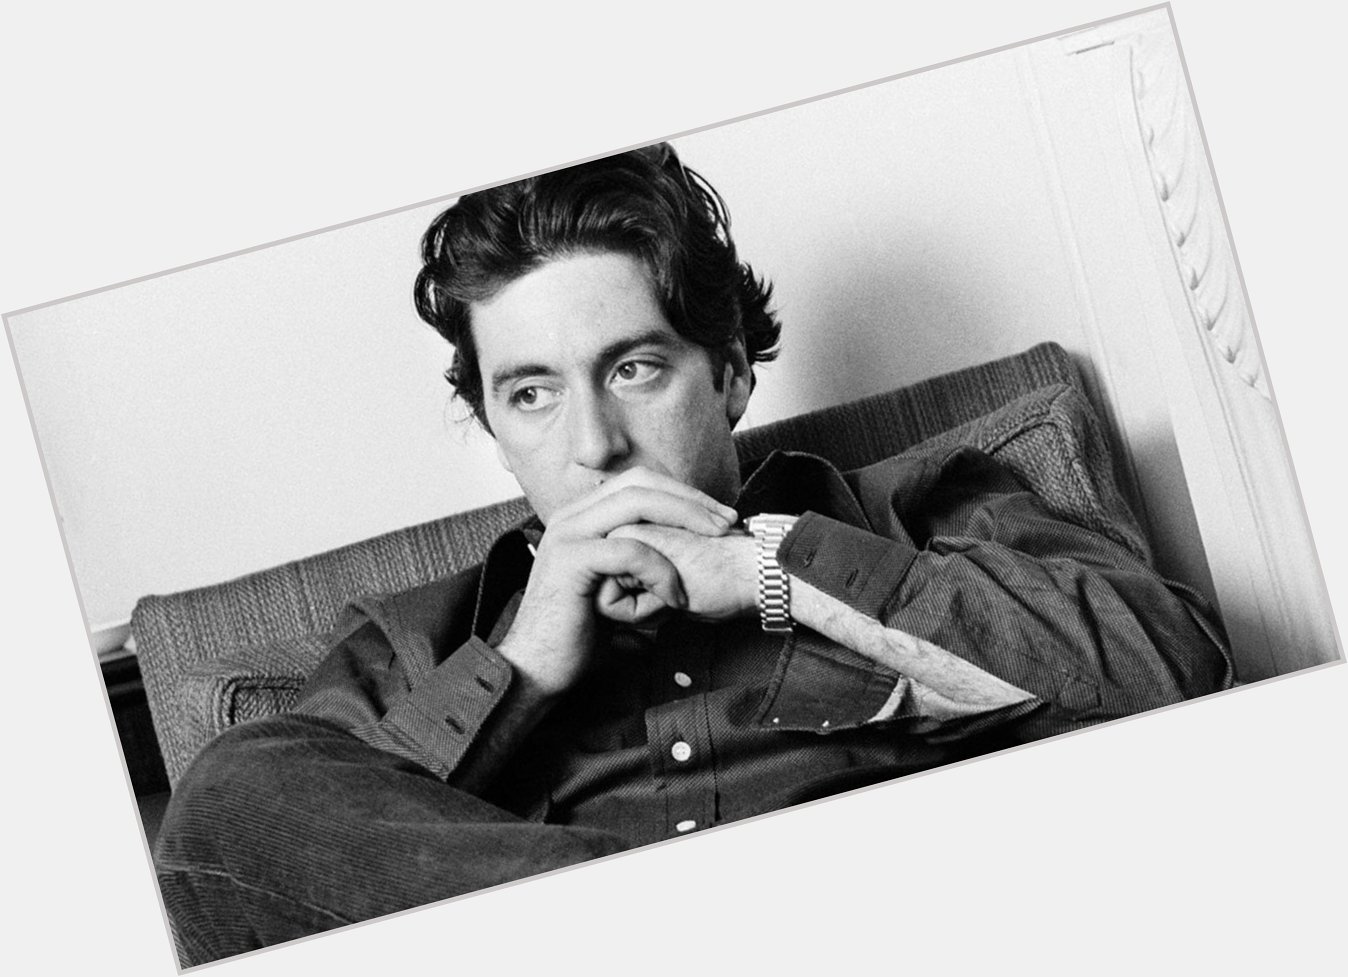 Happy 75th birthday to Al Pacino... truly one of the greatest actors of all time! Via 